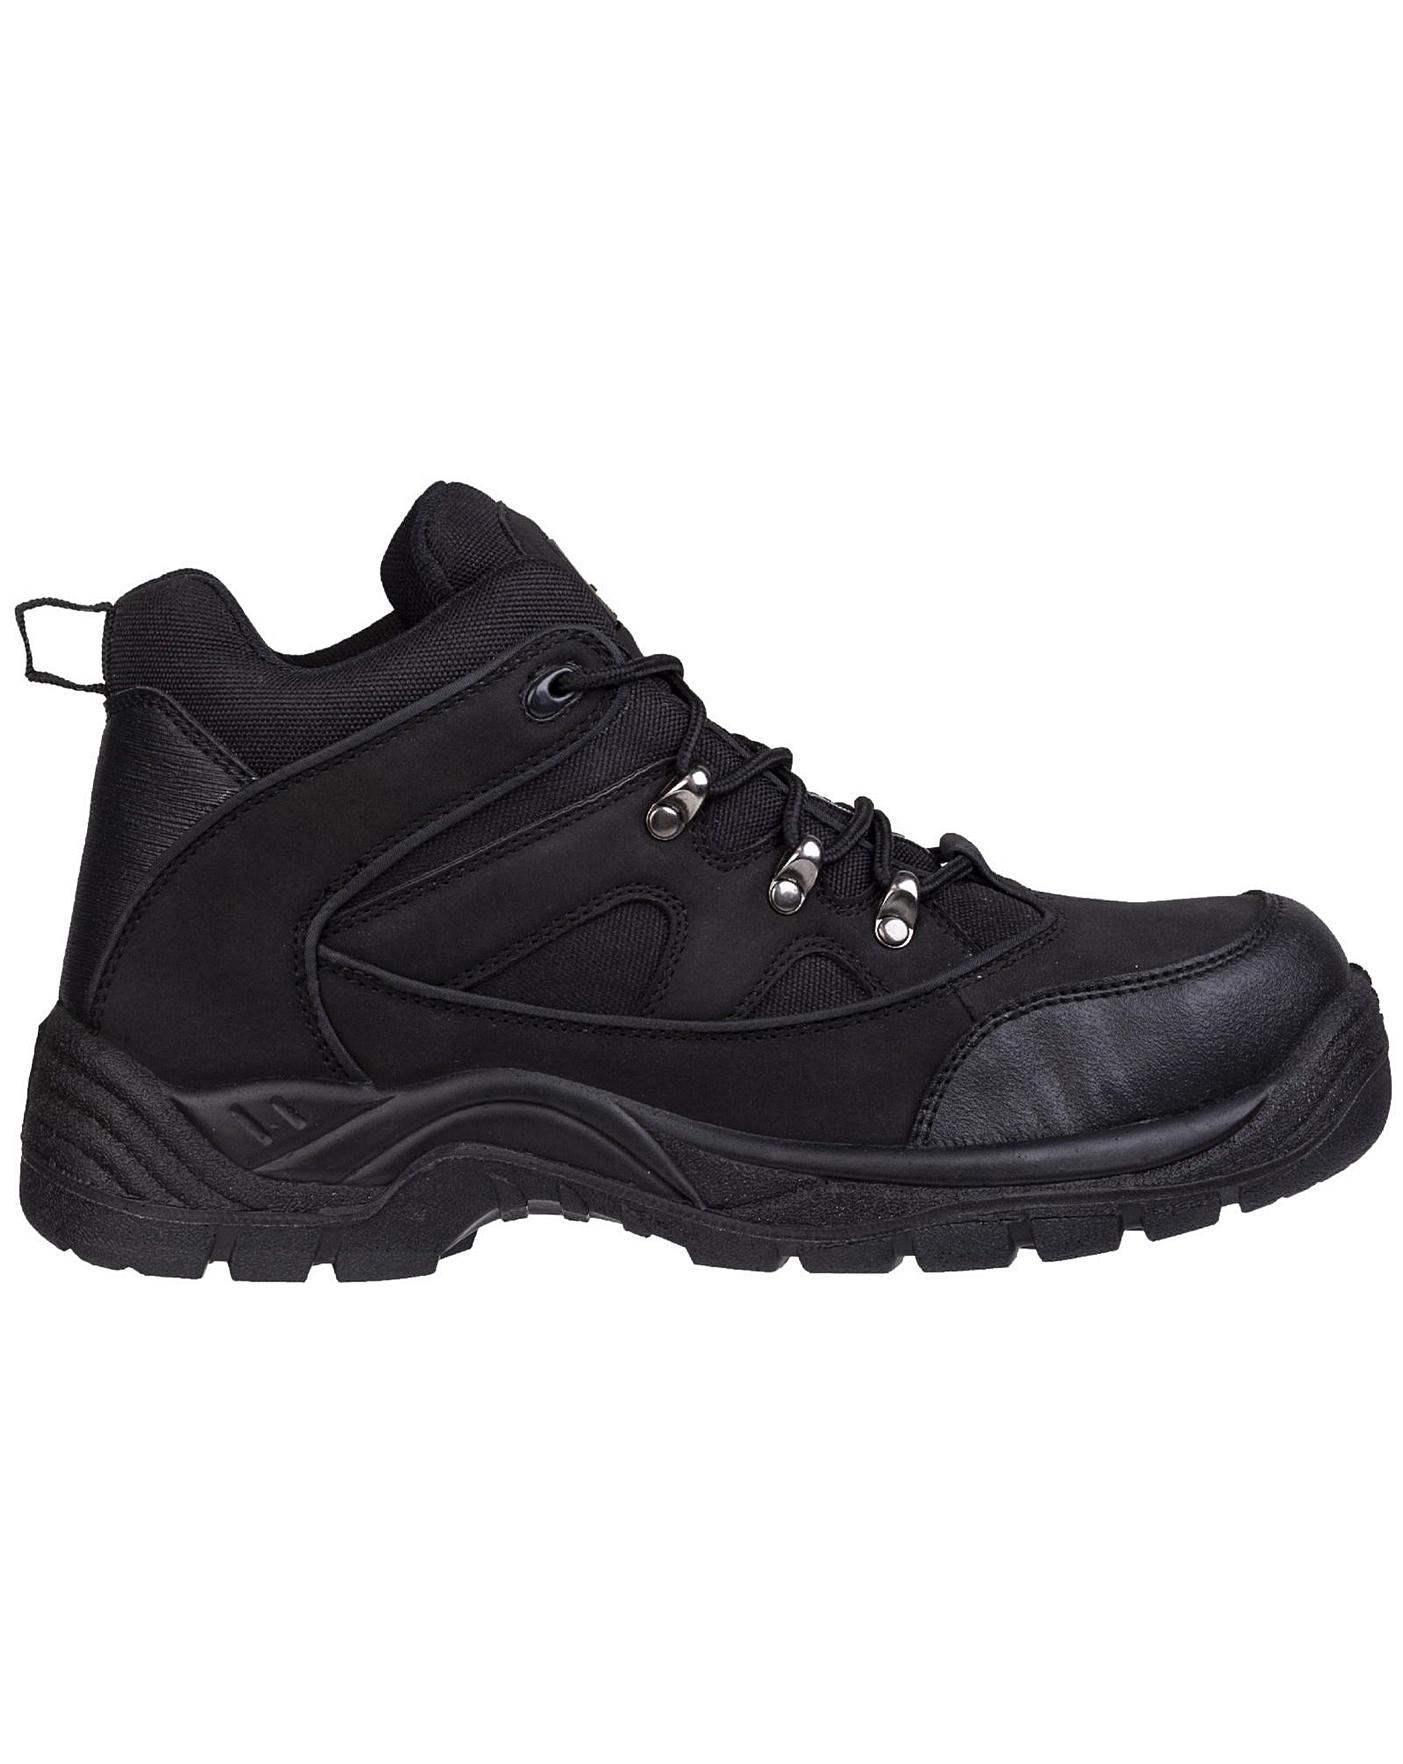 Amblers Safety FS151 Boots